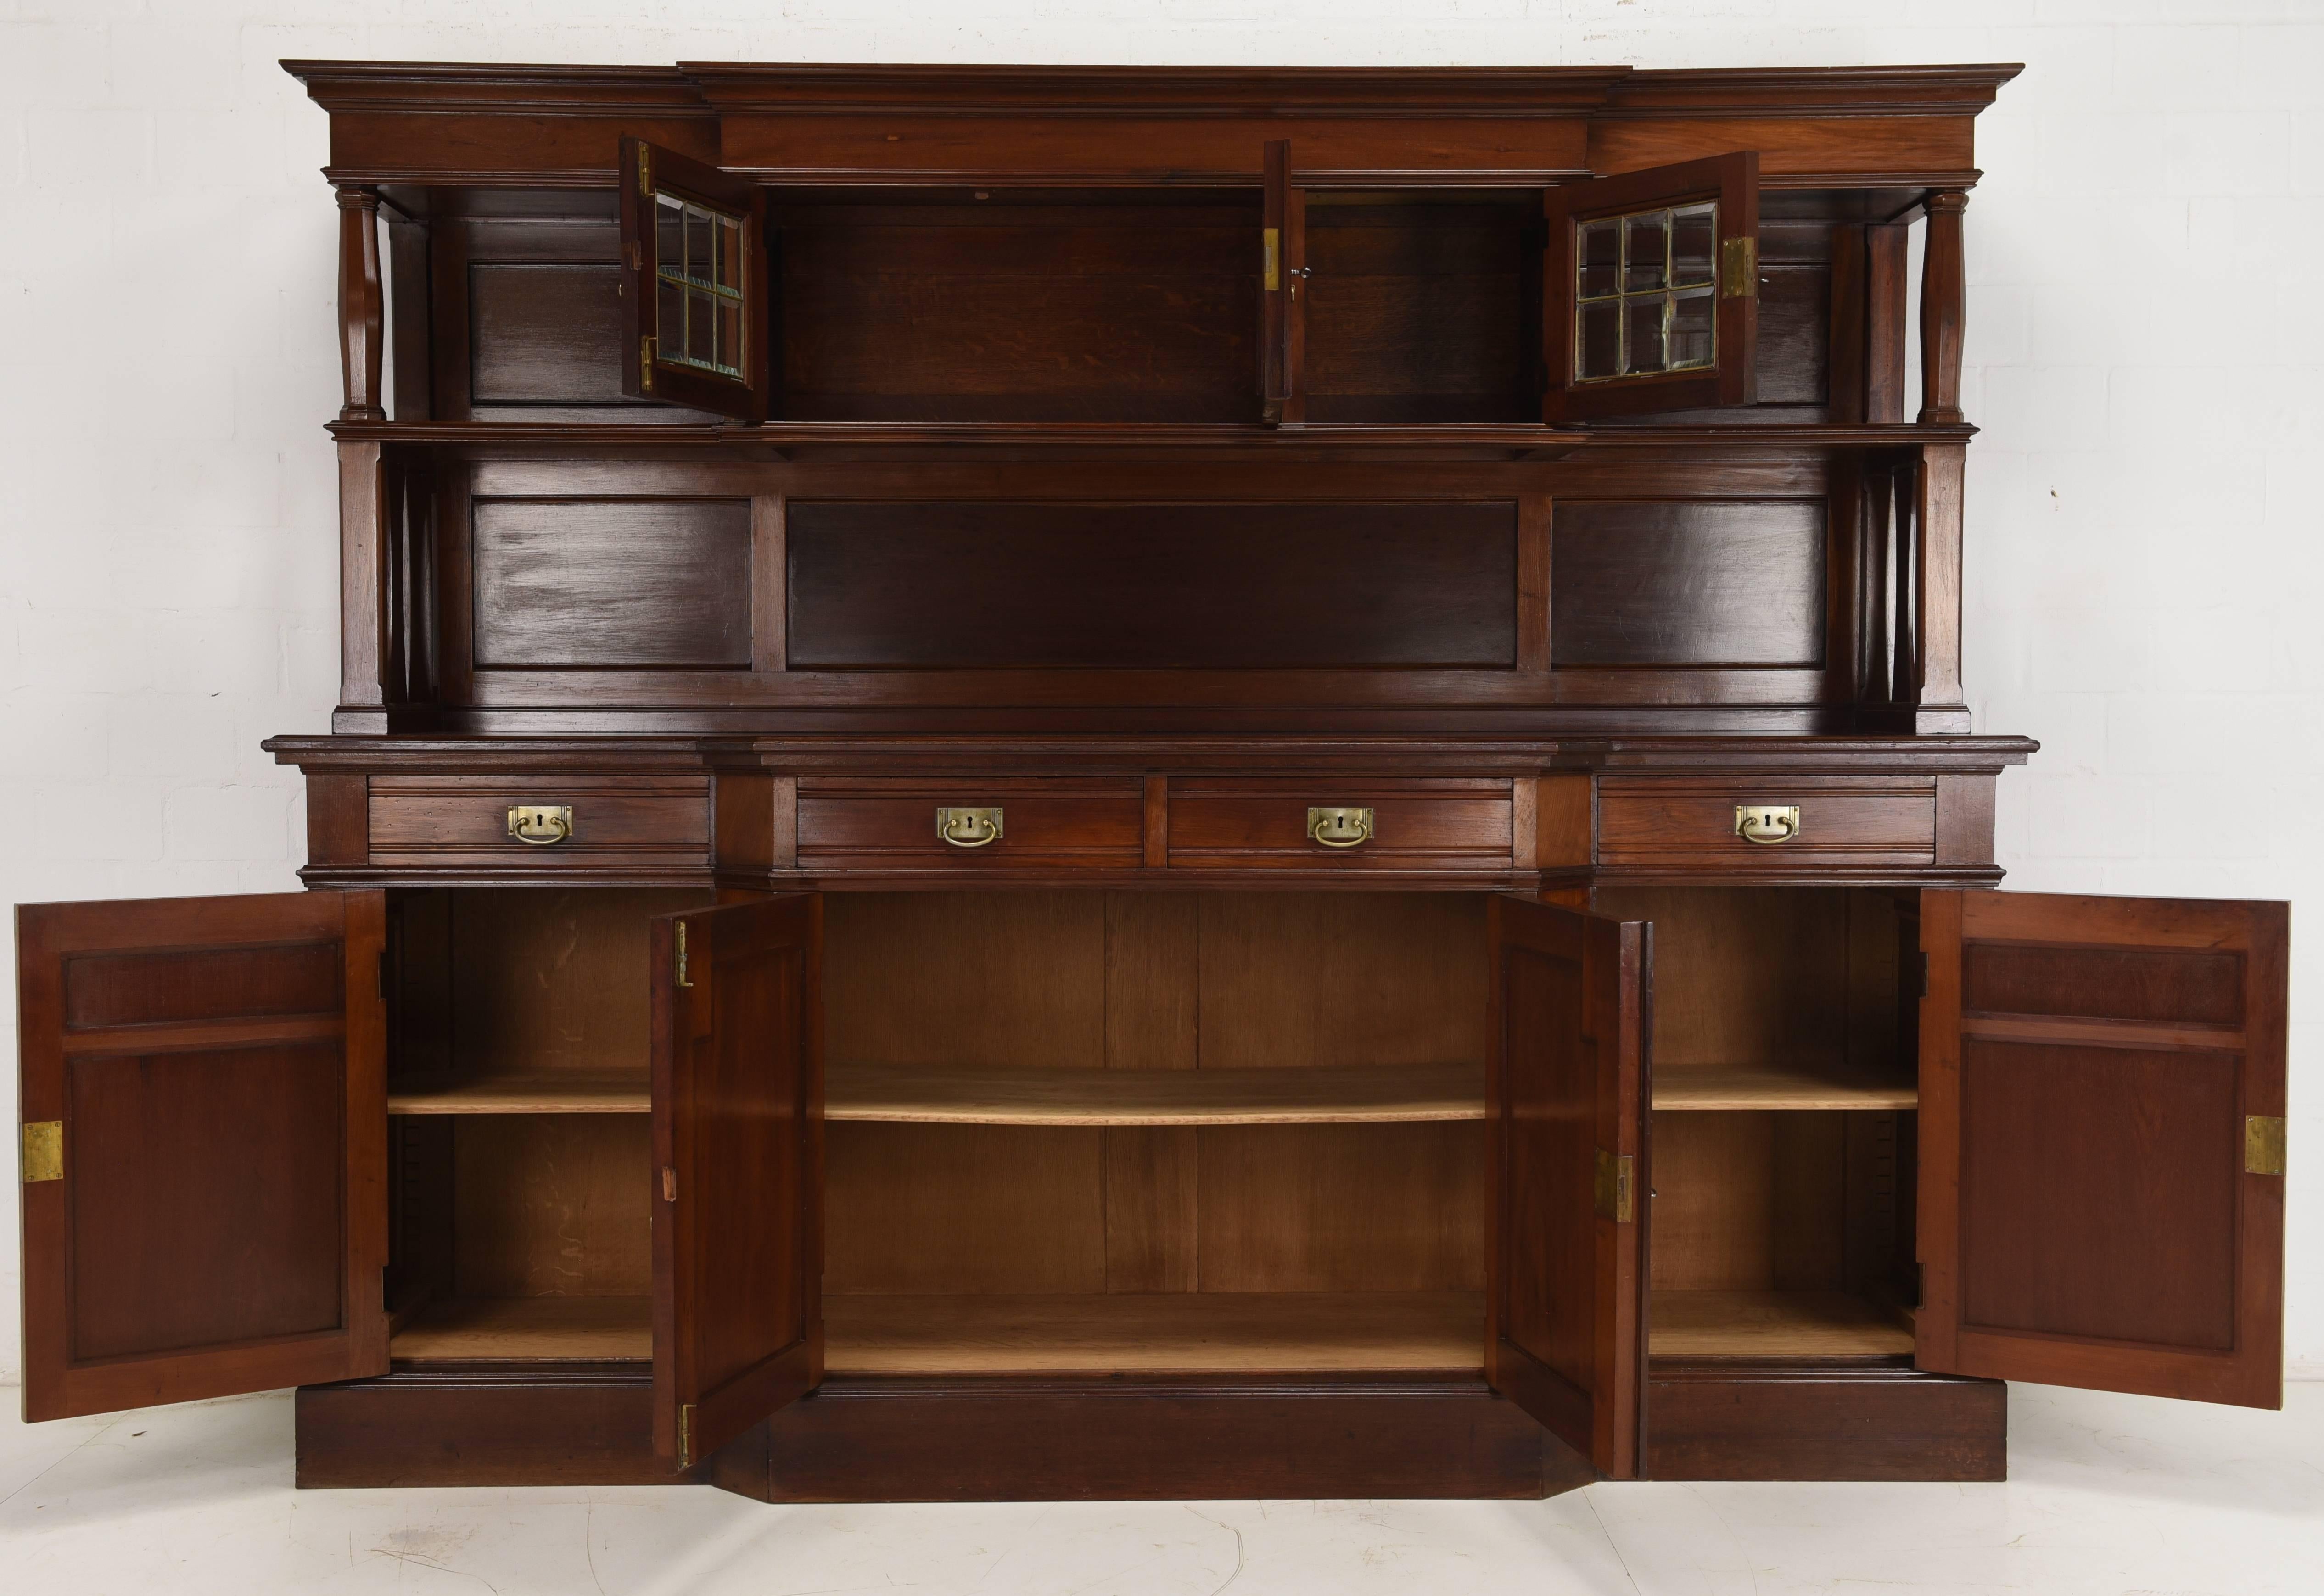 A large Art Nouveau buffet cabinet from circa 1920. The corpus is made of mahogany and the interior is made of solid oakwood. The piece is made in great craftsmanship and has a very high quality. Original brass fittings and high quality original